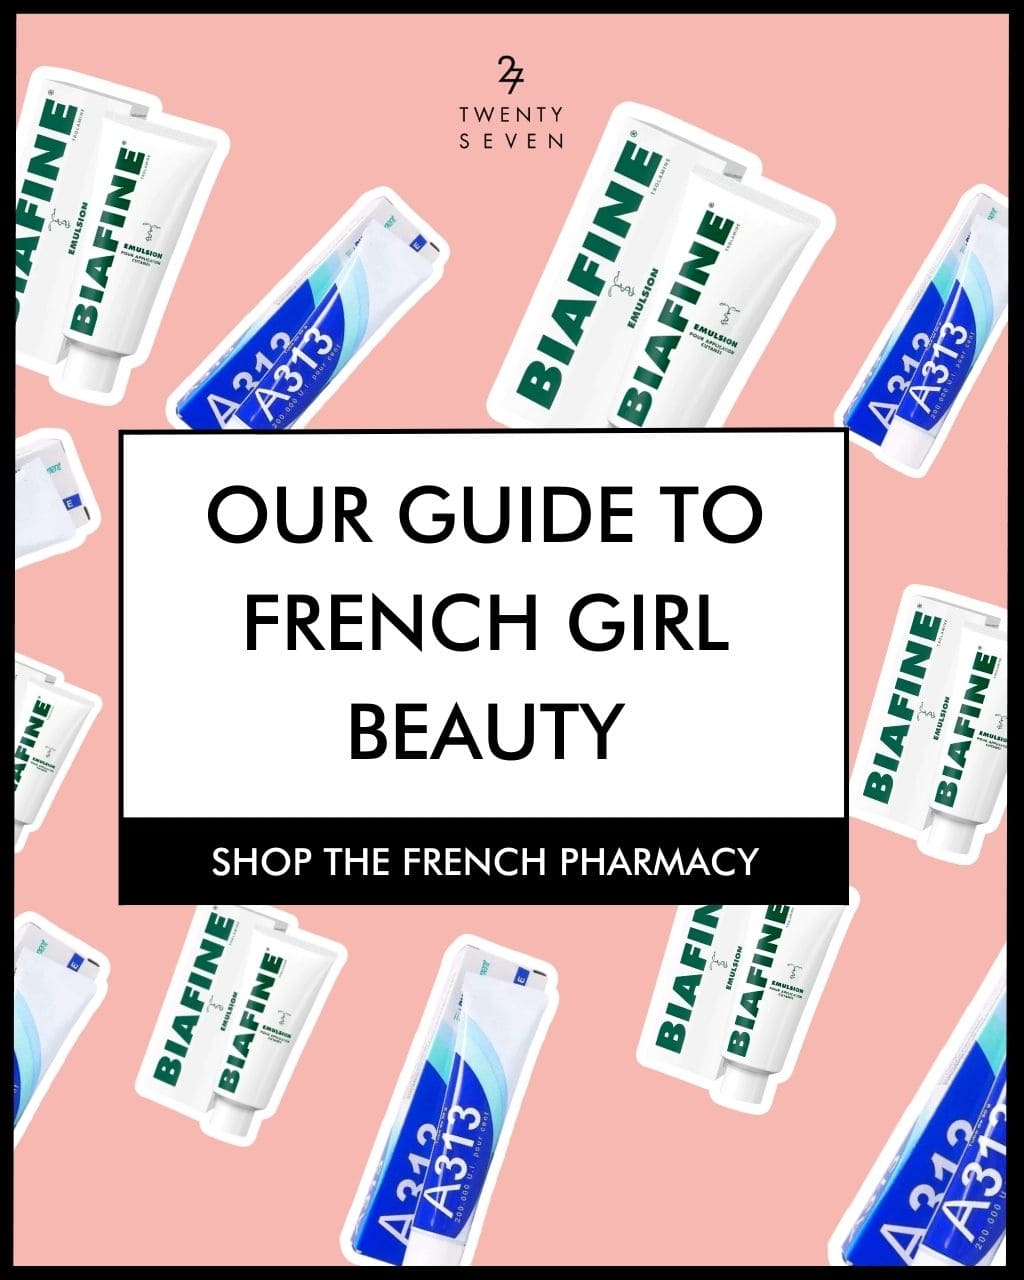 Twentyseven Toronto The 27 Journal | The Ultimate Guide to French Skincare